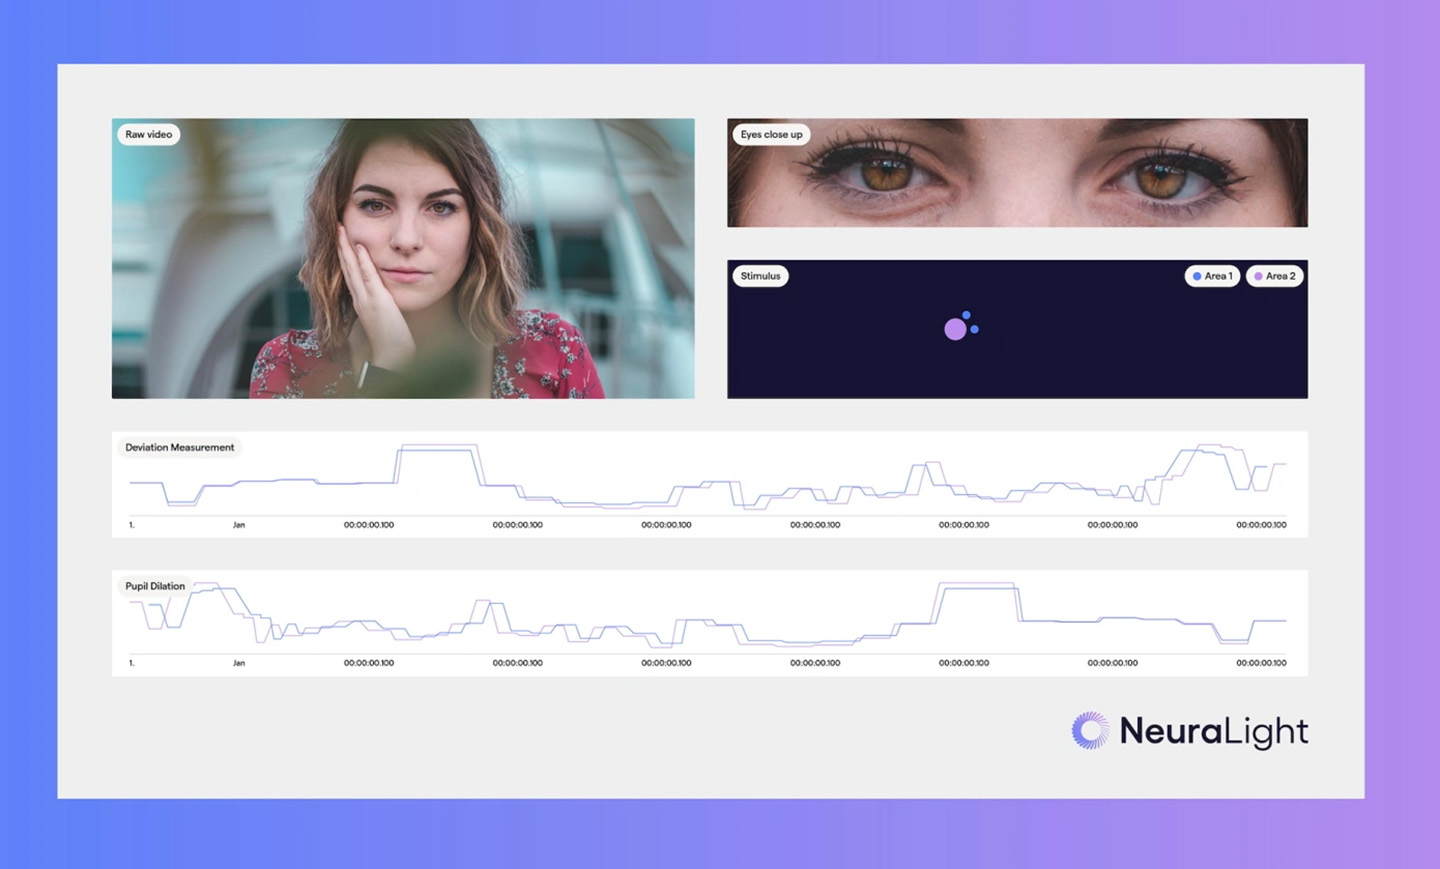 TechCrunch: NeuraLight aims to track ALS, Parkinson’s and more with an ordinary webcam